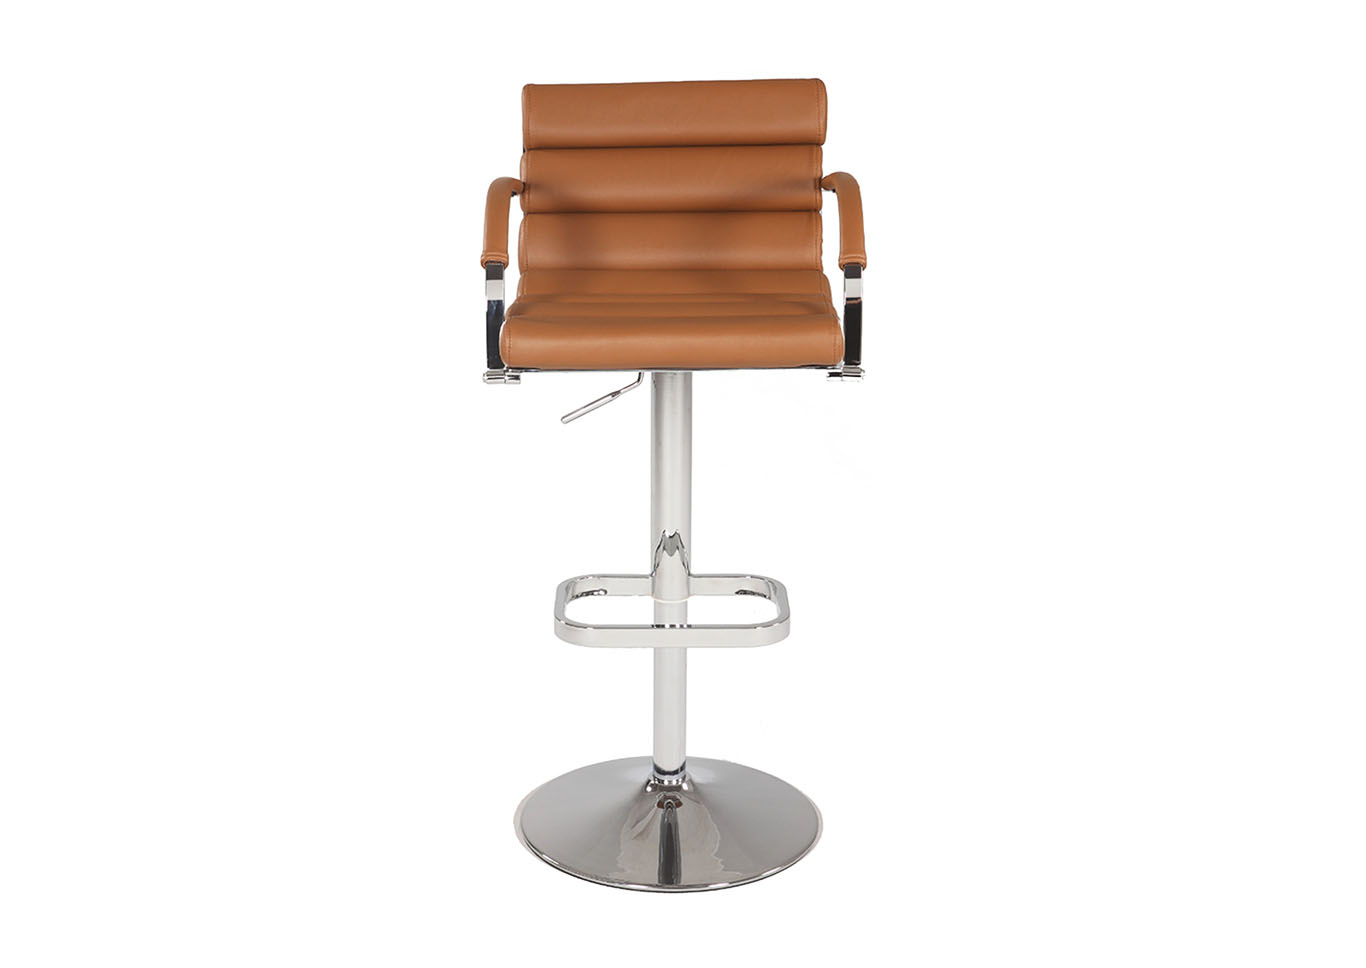 Brown Pneumatic Adjustable Height Swivel Stool,Chintaly Imports